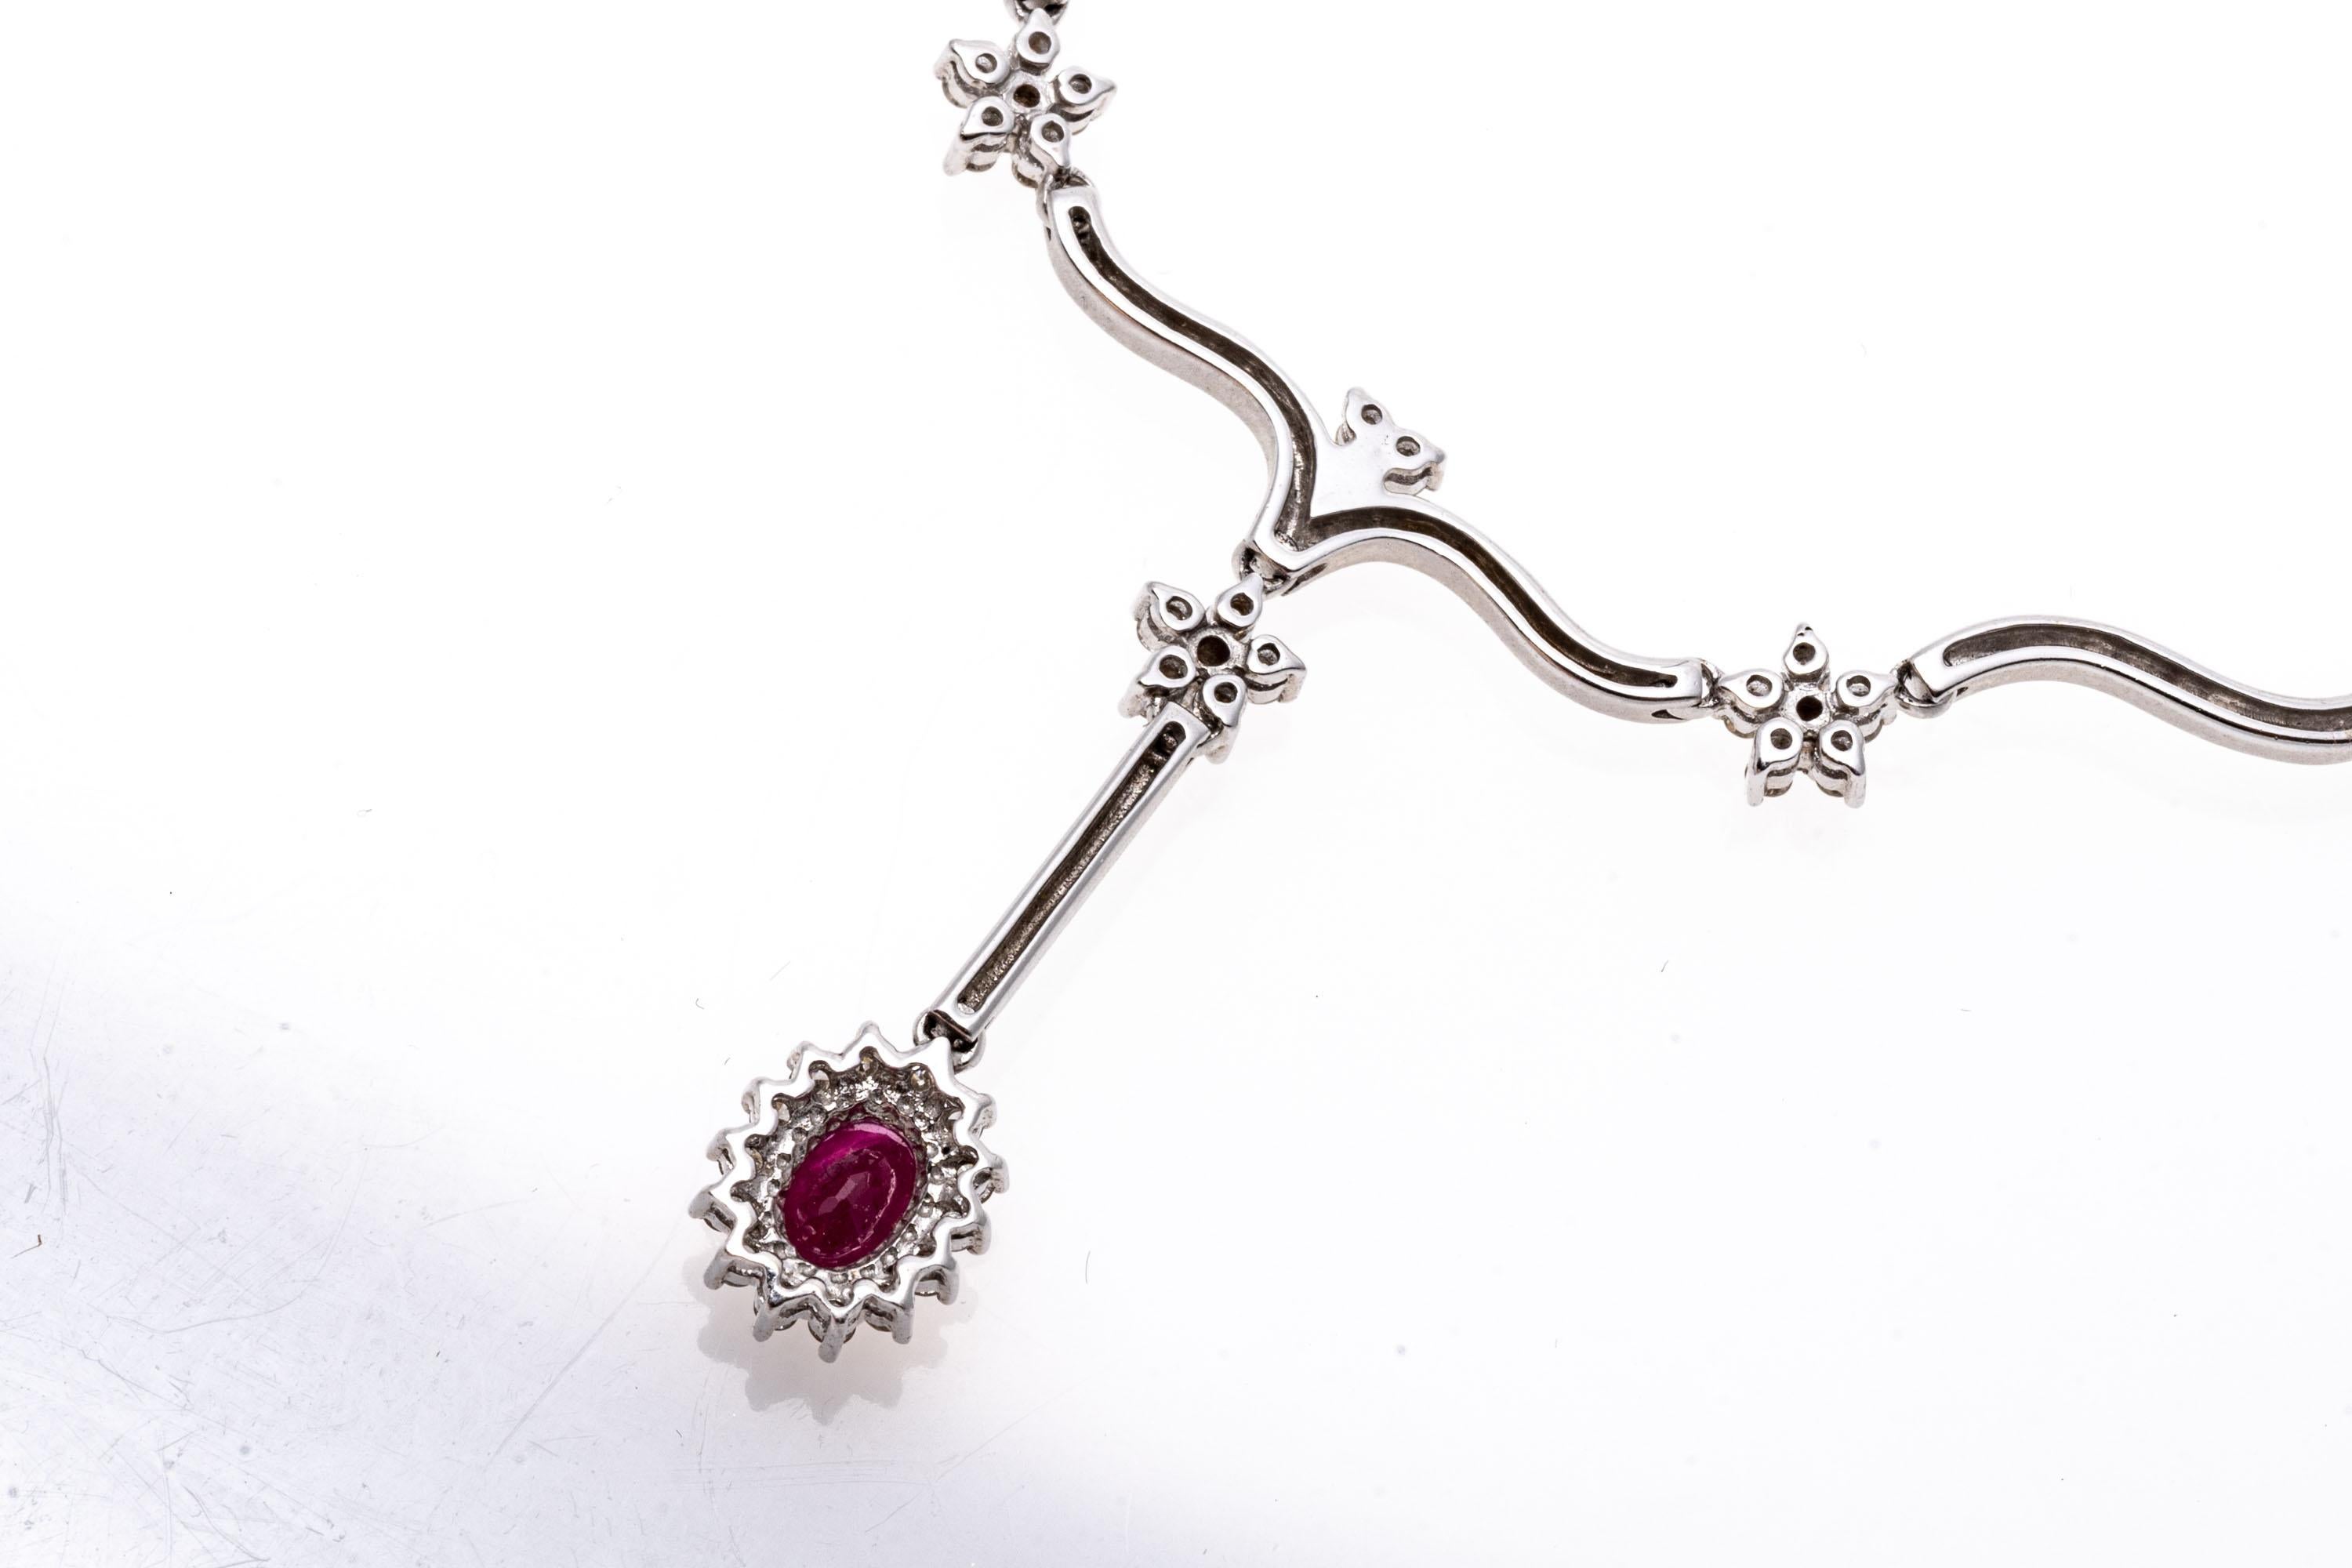 Retro 14k Wavy Link Necklace With Diamonds And A Drop Ruby Cluster For Sale